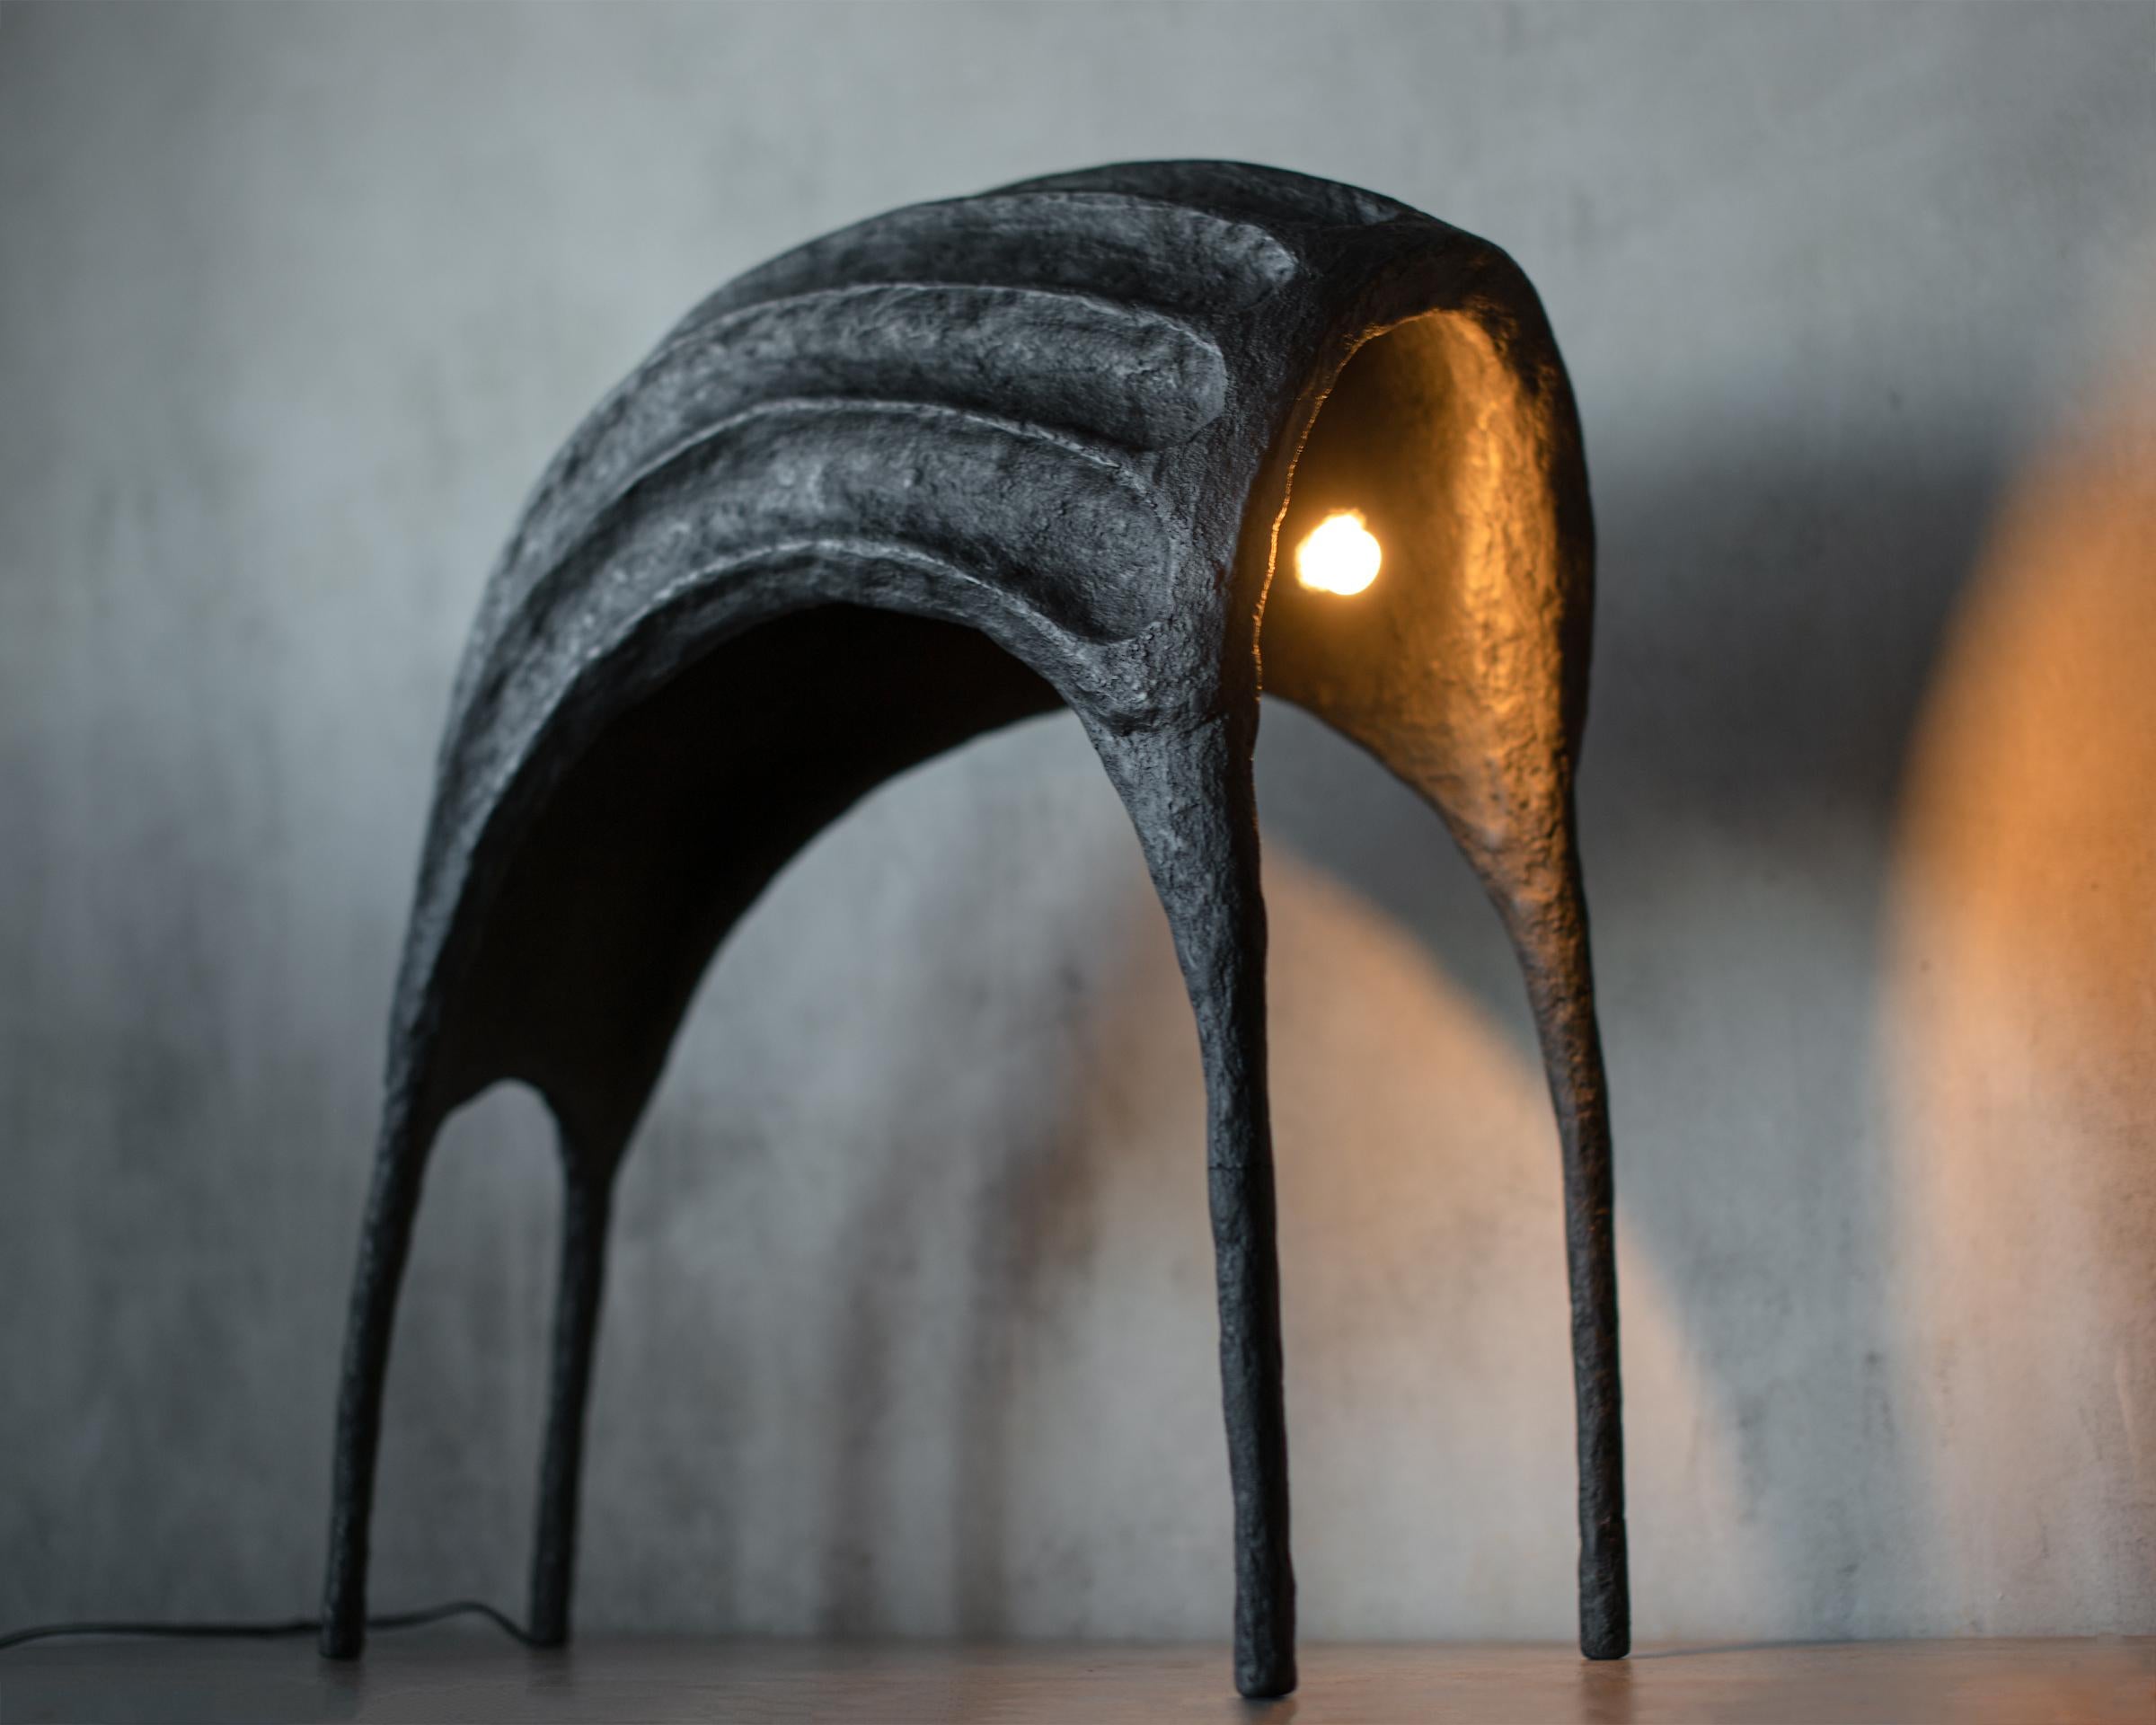 Contemporary table/floor lamp Panzir by Pavel Vishnevsky. 
Unique piece.
Materials: recycled waste paper, metal frame, decor varnish coating
Base: E14
Dimensions: 480 x 260 x 550
Weight: 3.7 kg

